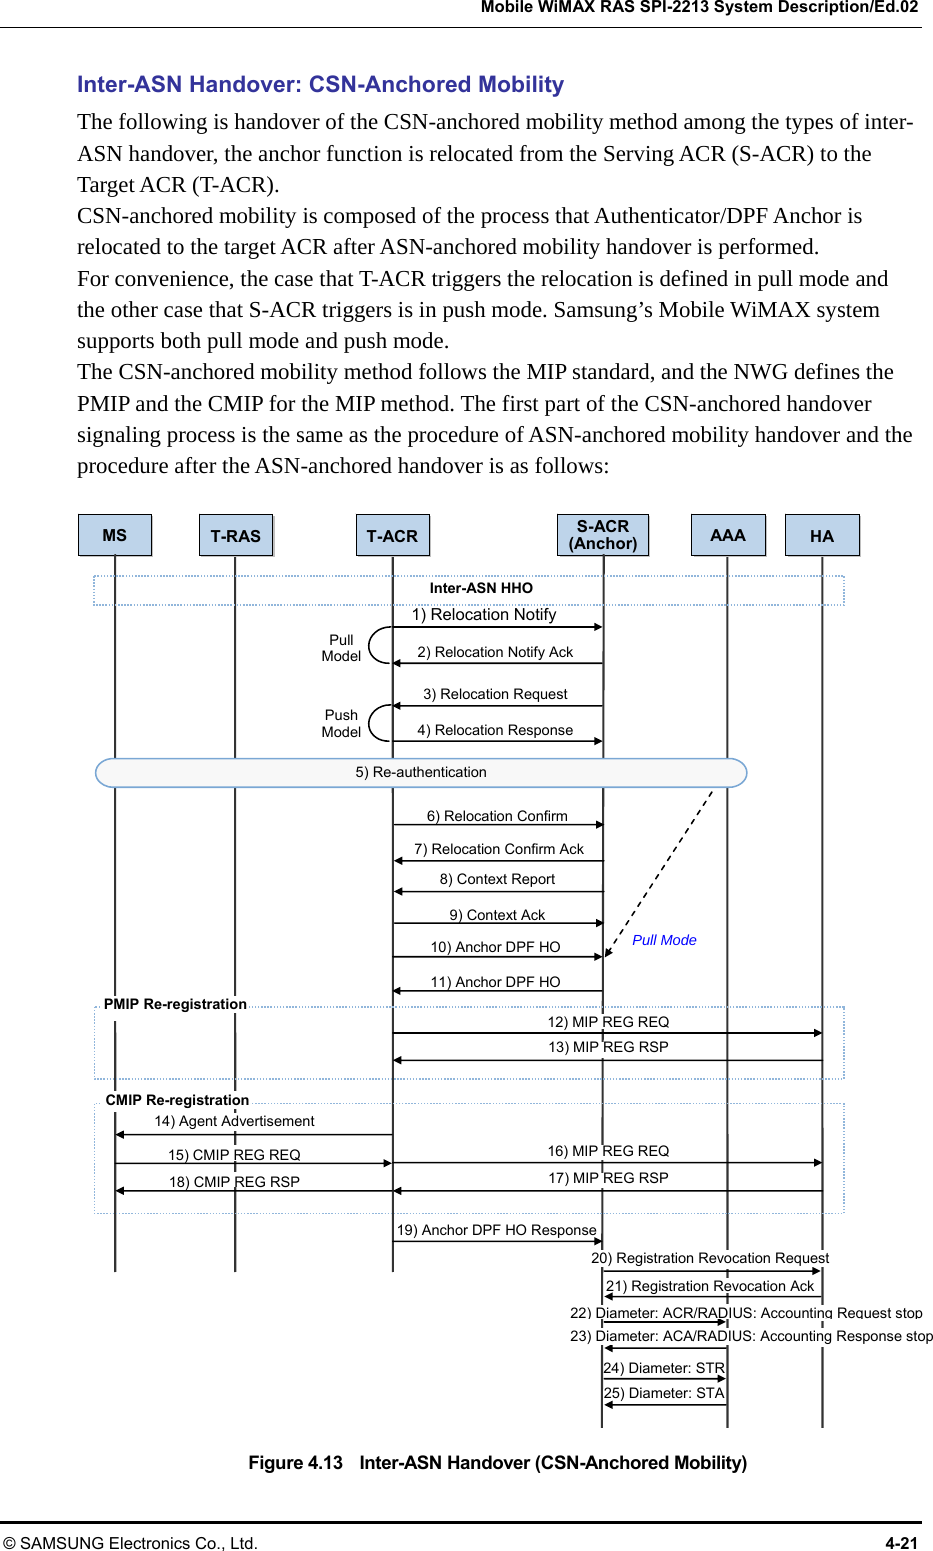   Mobile WiMAX RAS SPI-2213 System Description/Ed.02 © SAMSUNG Electronics Co., Ltd.  4-21 Inter-ASN Handover: CSN-Anchored Mobility The following is handover of the CSN-anchored mobility method among the types of inter-ASN handover, the anchor function is relocated from the Serving ACR (S-ACR) to the Target ACR (T-ACR).   CSN-anchored mobility is composed of the process that Authenticator/DPF Anchor is relocated to the target ACR after ASN-anchored mobility handover is performed.   For convenience, the case that T-ACR triggers the relocation is defined in pull mode and the other case that S-ACR triggers is in push mode. Samsung’s Mobile WiMAX system supports both pull mode and push mode.   The CSN-anchored mobility method follows the MIP standard, and the NWG defines the PMIP and the CMIP for the MIP method. The first part of the CSN-anchored handover signaling process is the same as the procedure of ASN-anchored mobility handover and the procedure after the ASN-anchored handover is as follows:  Figure 4.13    Inter-ASN Handover (CSN-Anchored Mobility)   MS  S-ACR(Anchor)Inter-ASN HHO 1) Relocation Notify 2) Relocation Notify Ack3) Relocation Request4) Relocation ResponsePull Model Push Model 10) Anchor DPF HO 11) Anchor DPF HO 12) MIP REG REQ 13) MIP REG RSP 16) MIP REG REQ 17) MIP REG RSP 14) Agent Advertisement 15) CMIP REG REQ 18) CMIP REG RSP 19) Anchor DPF HO Response24) Diameter: STR 25) Diameter: STA Pull Mode 5) Re-authentication 21) Registration Revocation Ack 6) Relocation Confirm7) Relocation Confirm Ack 8) Context Report 9) Context Ack HA AAA 22) Diameter: ACR/RADIUS: Accounting Request stop23) Diameter: ACA/RADIUS: Accounting Response stop PMIP Re-registration CMIP Re-registration 20) Registration Revocation Request T-RAS T-ACR